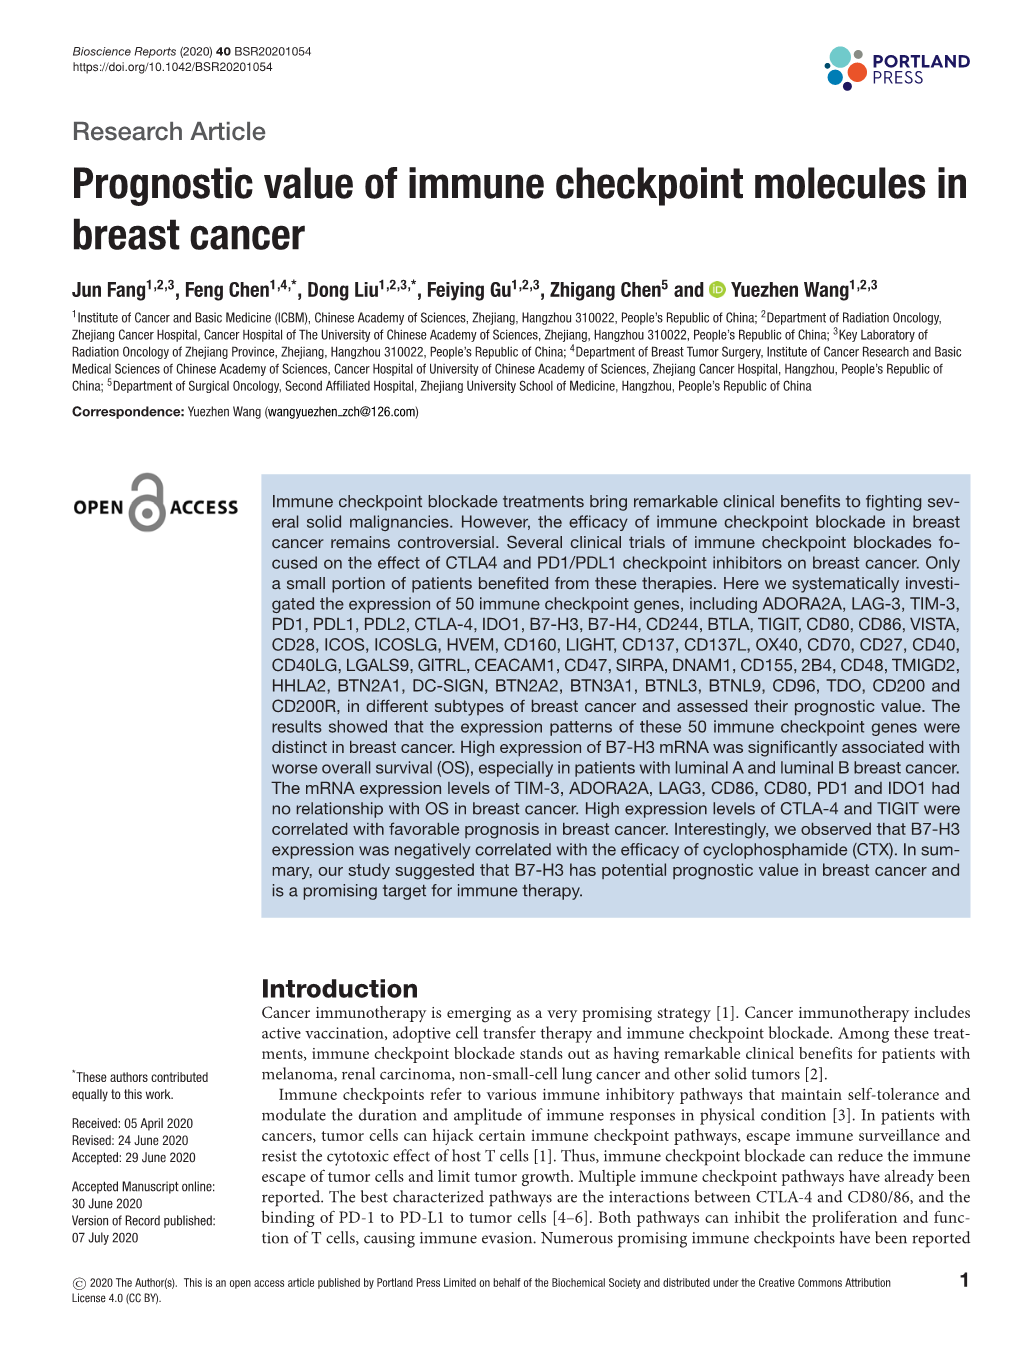 Prognostic Value of Immune Checkpoint Molecules in Breast Cancer